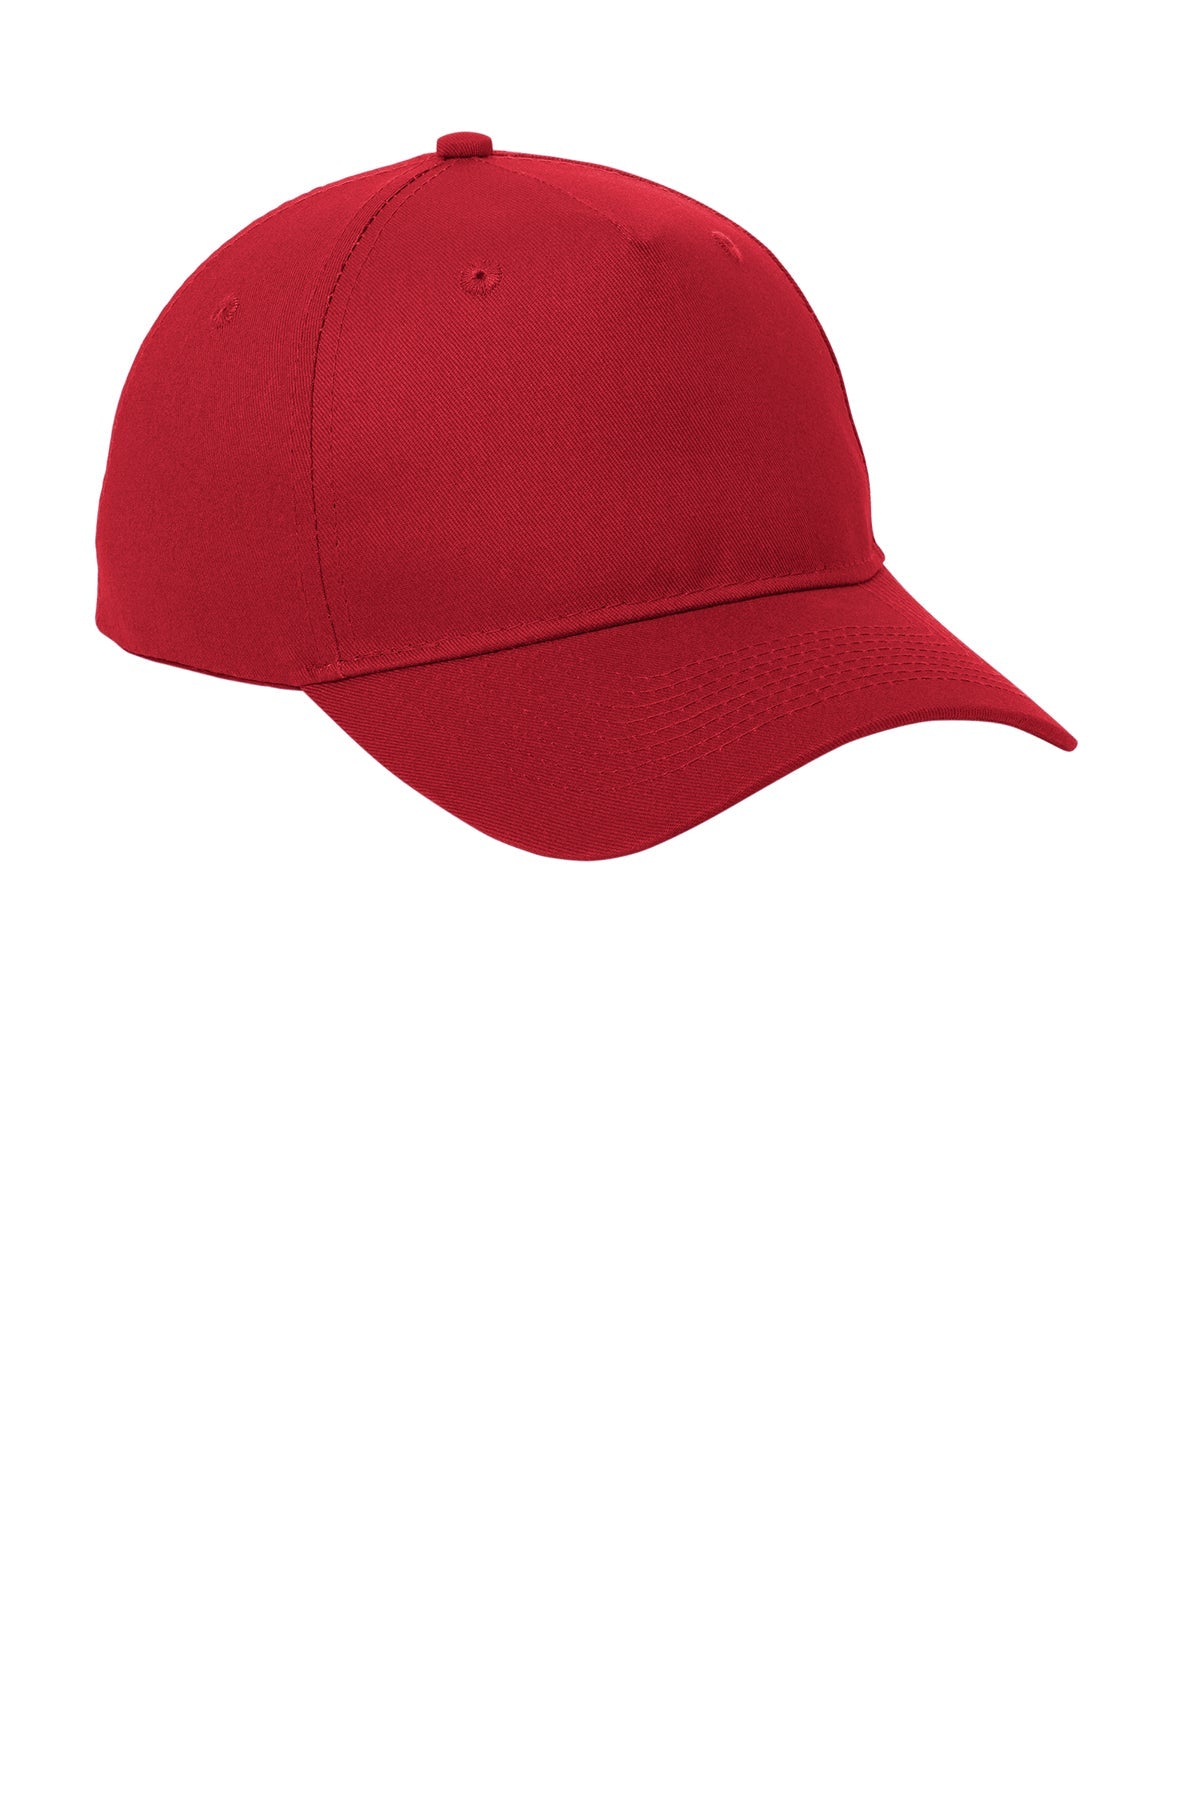 Port & Company Five Panel Customized Twill Caps, Red